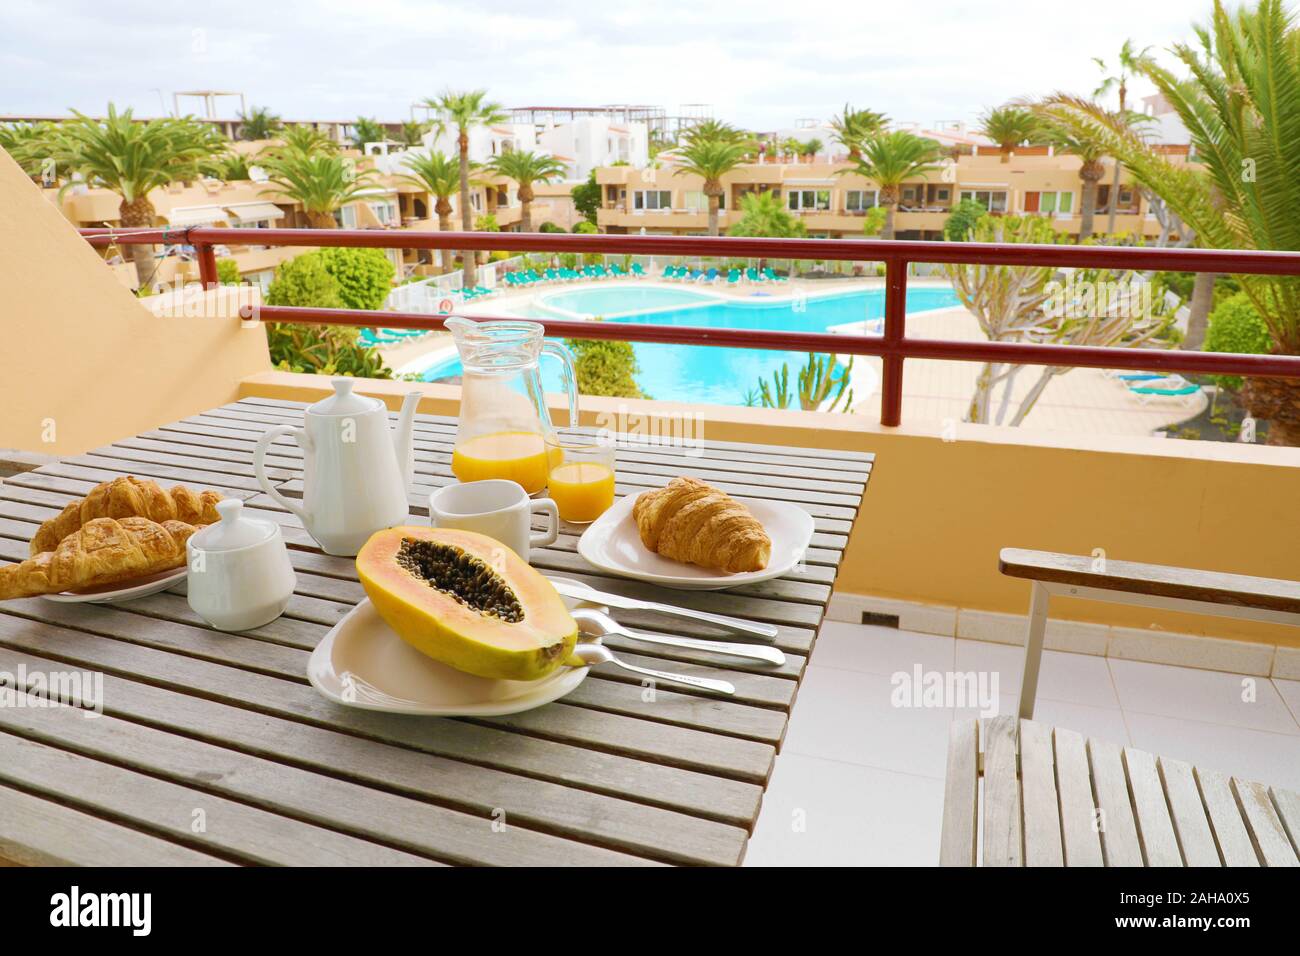 Hotel room breakfast on balcony view of swimming pool and palm trees. Vacation travel morning food breakfast in luxury resort outside. Stock Photo